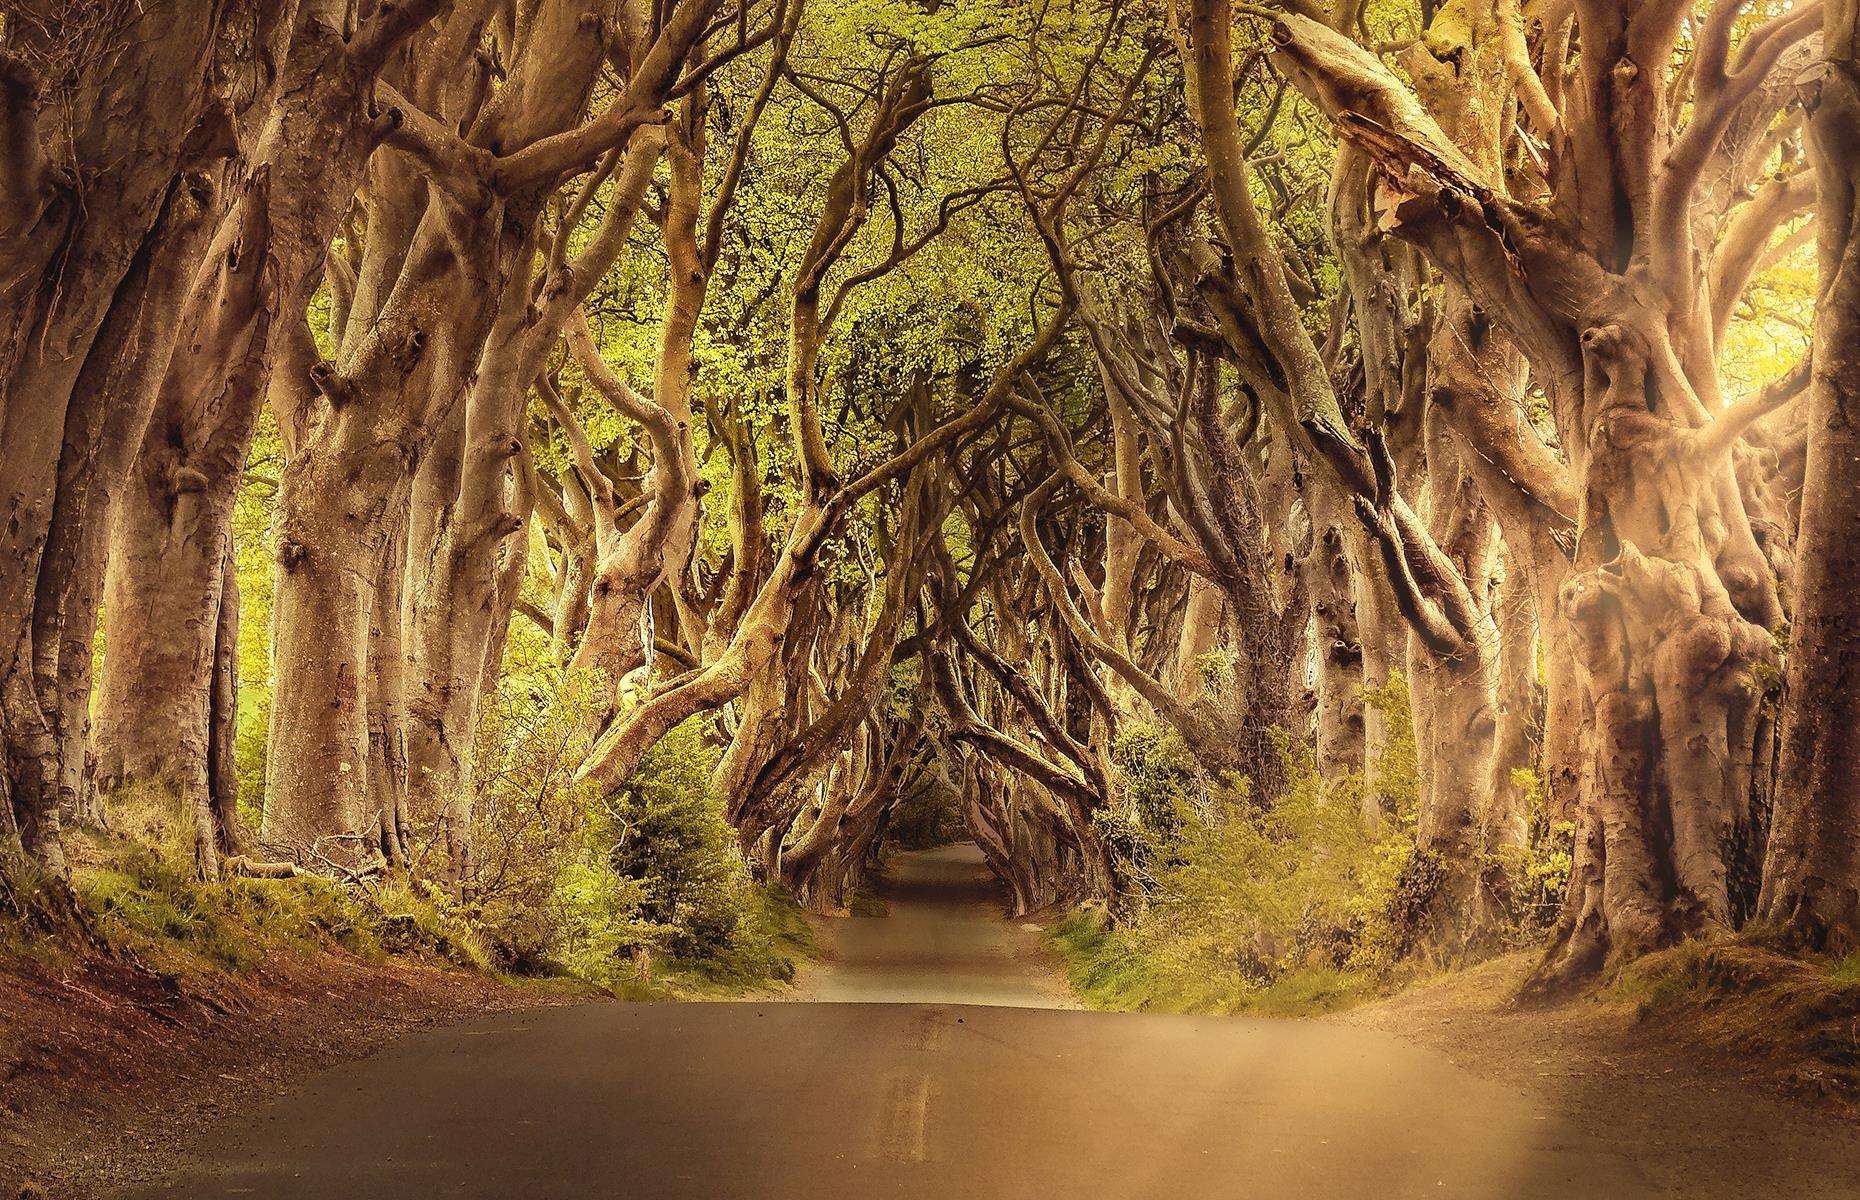 <p>You may recognize the Dark Hedges from cult HBO series <em>Game of Thrones</em>, but this twisting tunnel of trees has a legend of its own. The lane is supposedly home to the Grey Lady, an elusive specter who flits between the knotted trees, fading away as she reaches the end of the road. Her identity is unknown, though some think she's the wandering spirit of a local housemaid, whose mysterious death raised questions centuries ago. Today it's one of the most photographed places in Northern Ireland – check your snaps for any mysterious shapes... </p>  <p><strong>Liking this? Click on the Follow button above for more great stories from loveEXPLORING</strong></p>